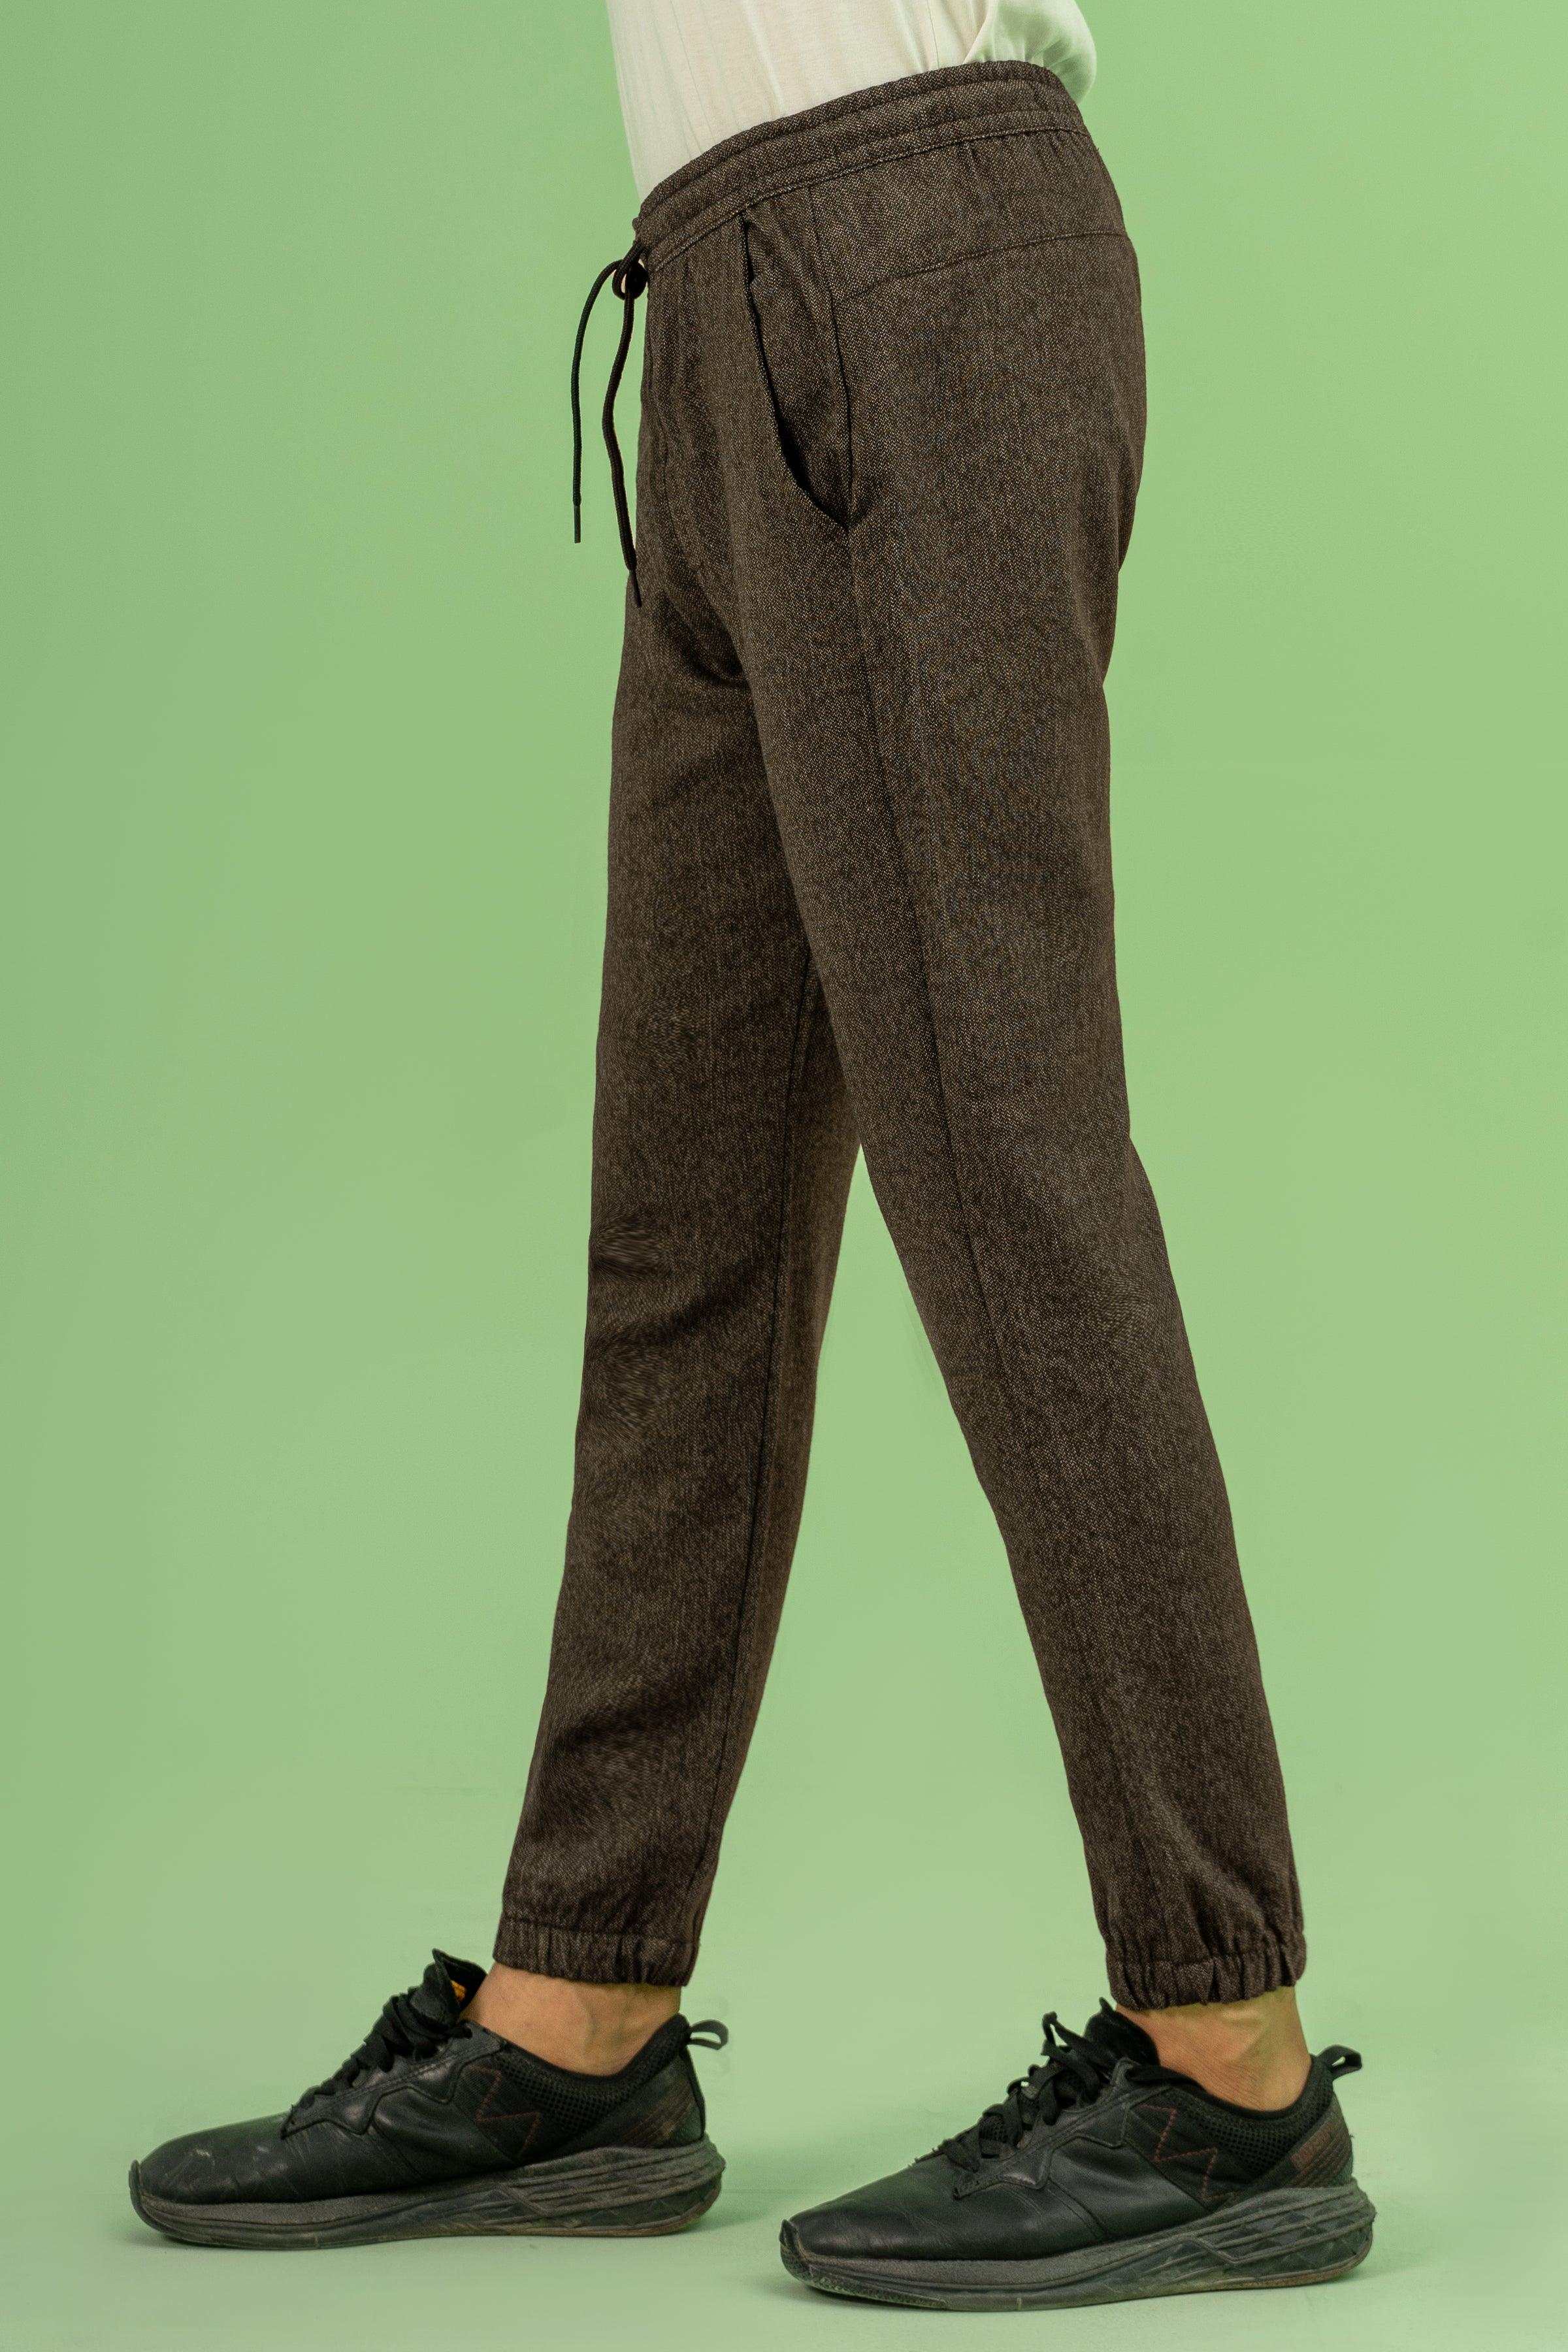 SELF TEXTURED CONTRAST TAPE TROUSER BROWN BLACK at Charcoal Clothing